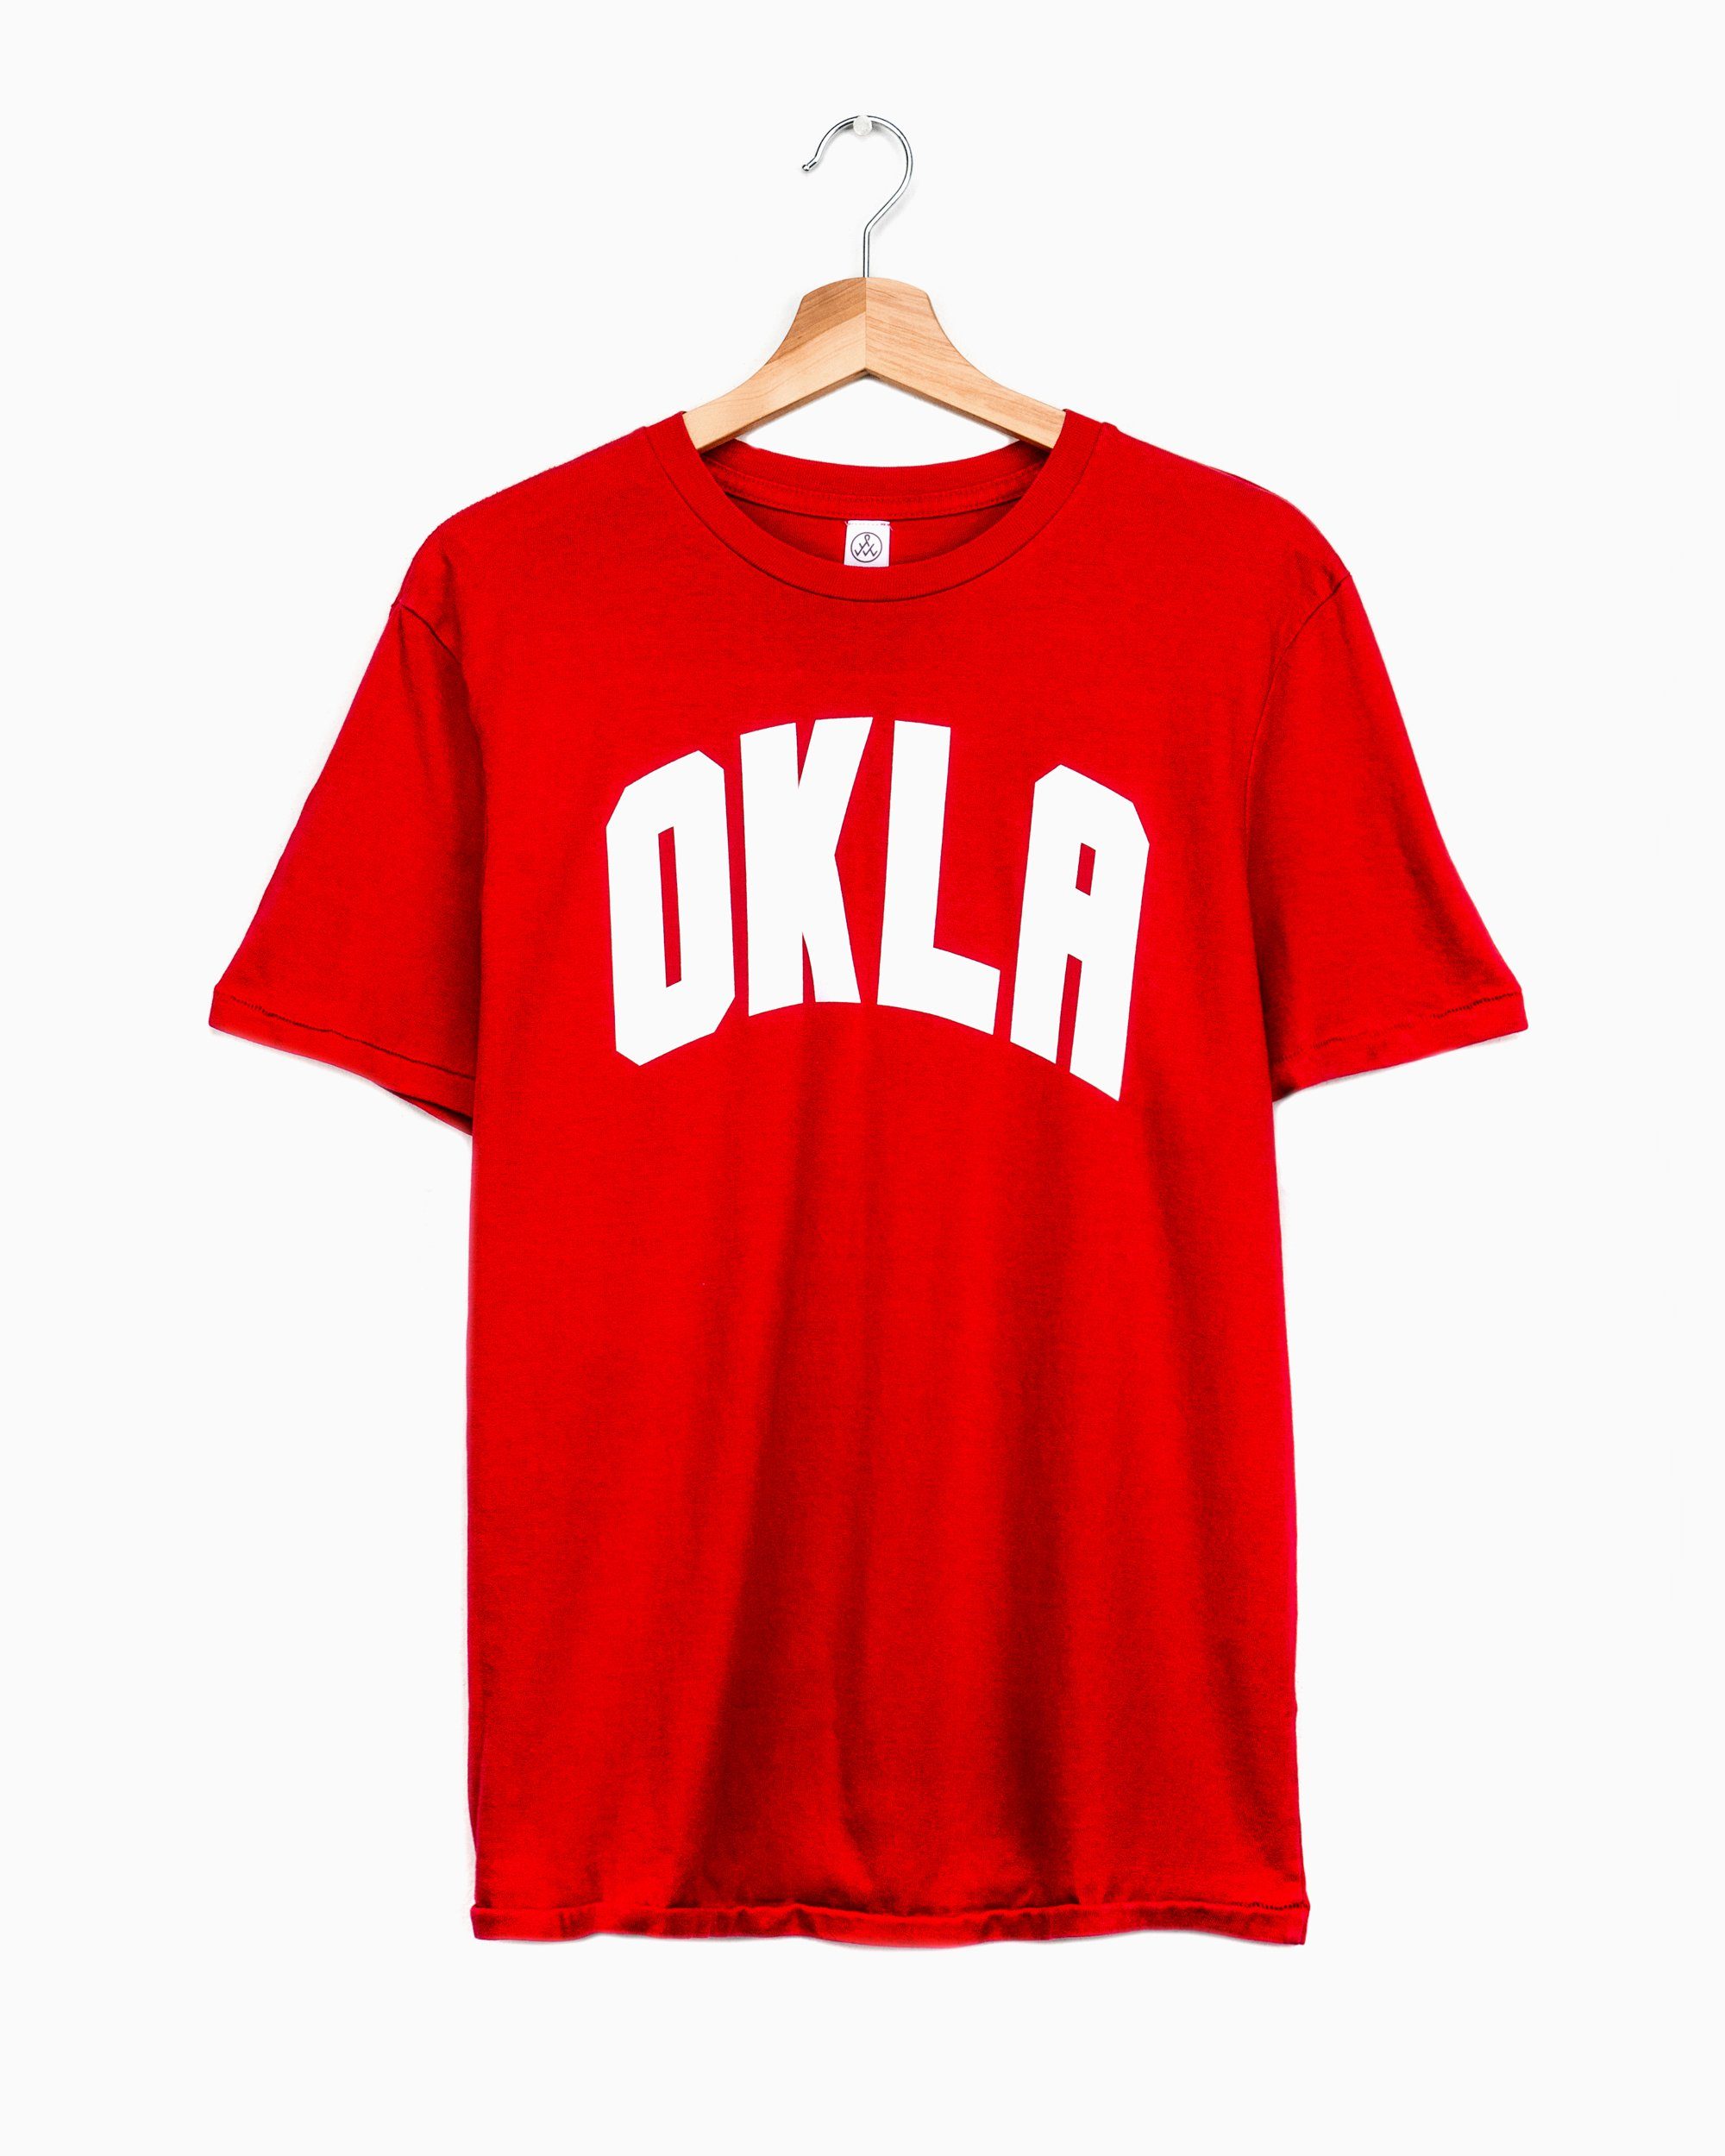 OKLA Red Tri-Blend Tee with White Letters (4462406402151)